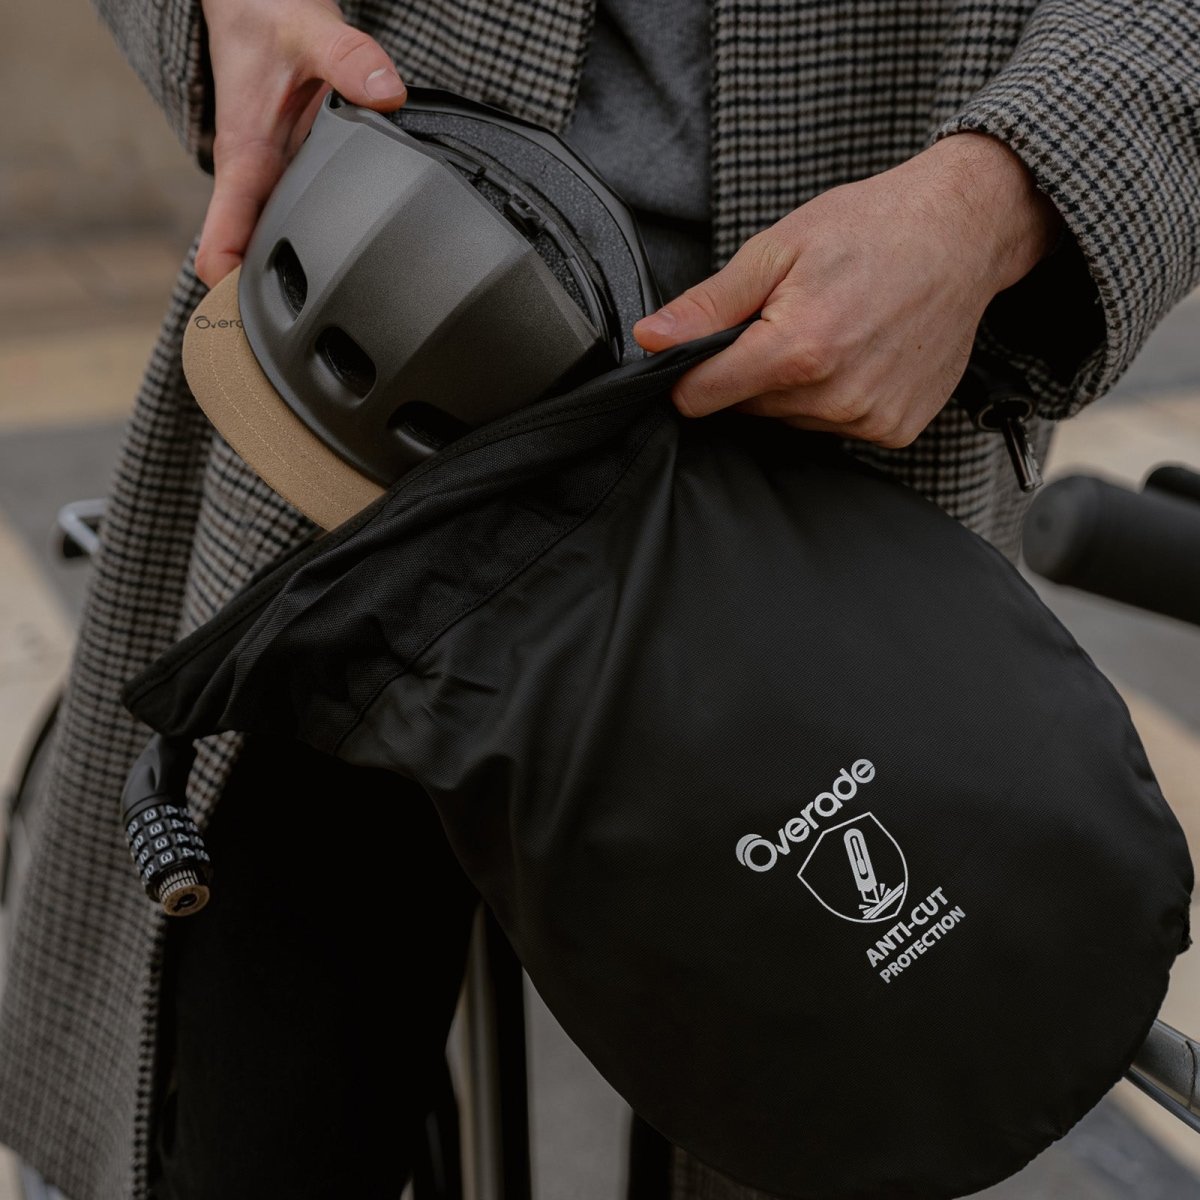 LOXI secure bag for bike and scooter